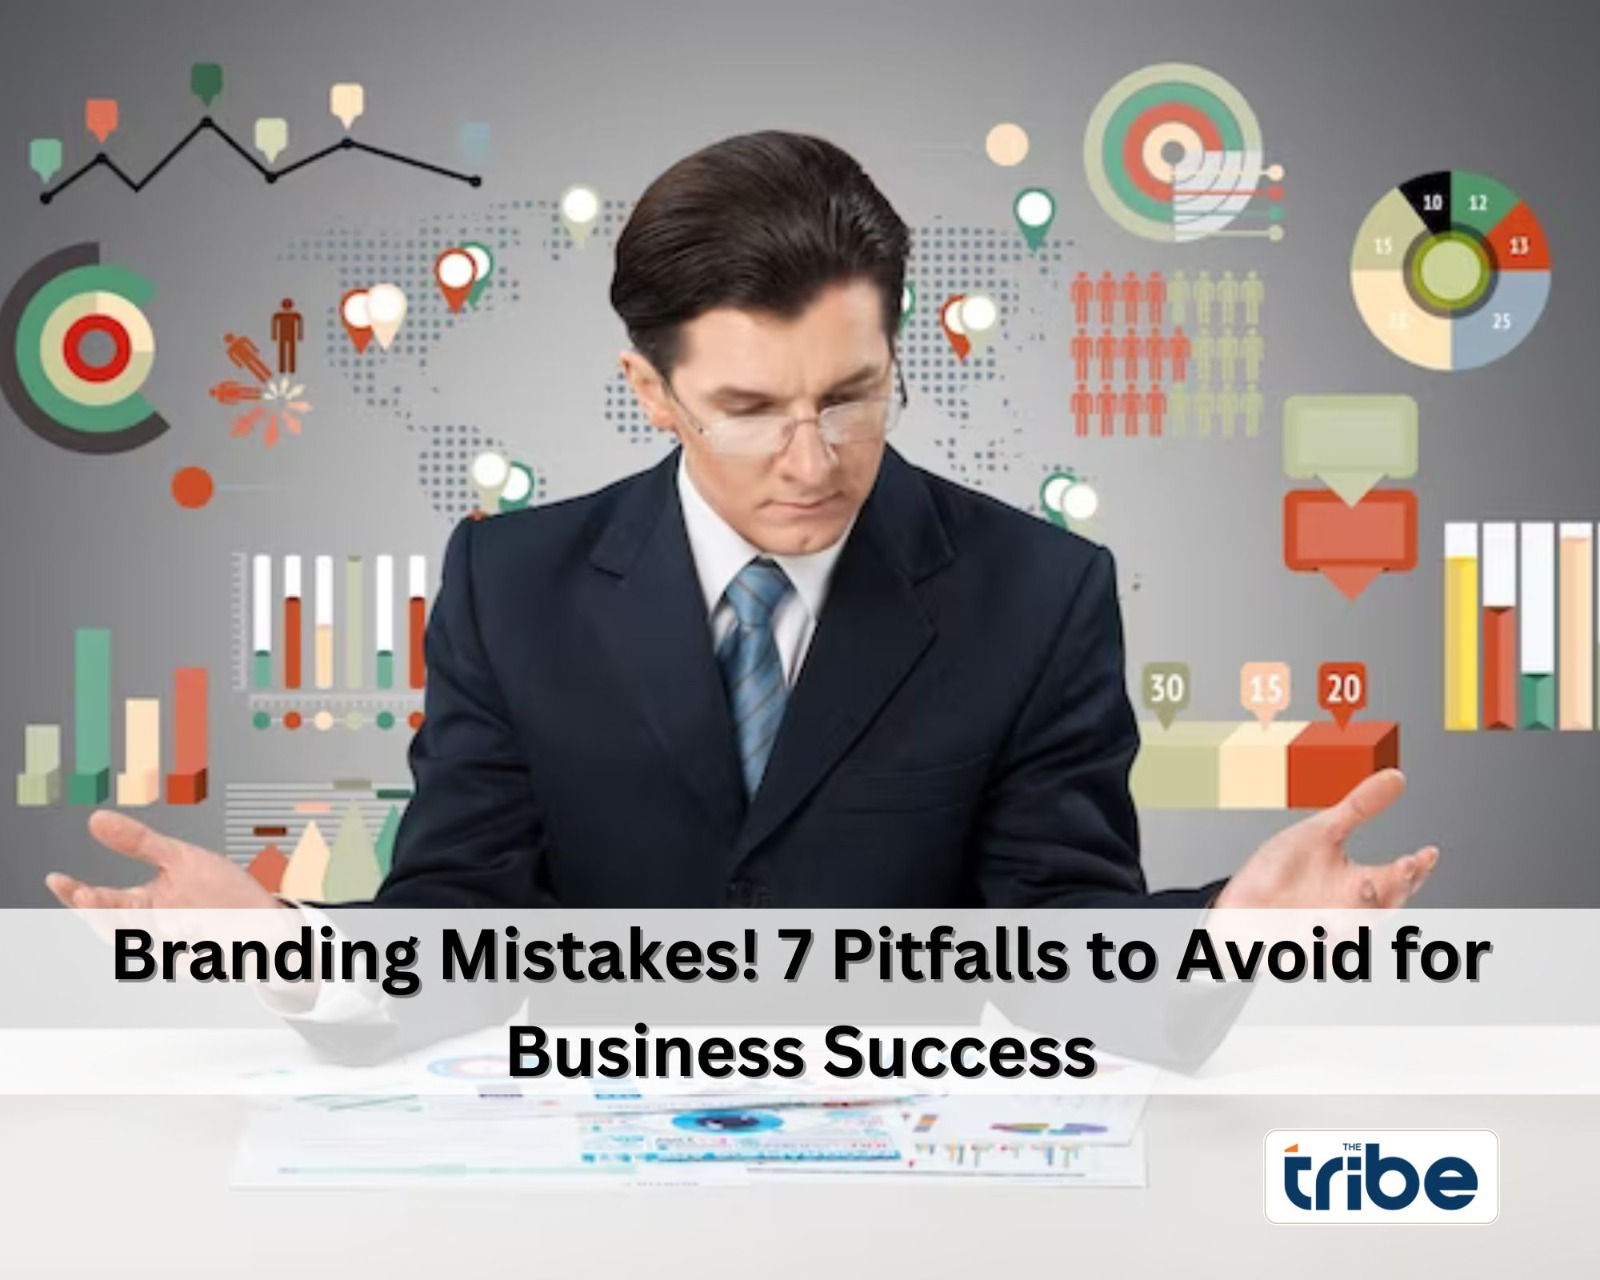 Branding Mistakes! 7 Pitfalls to Avoid for Business Success